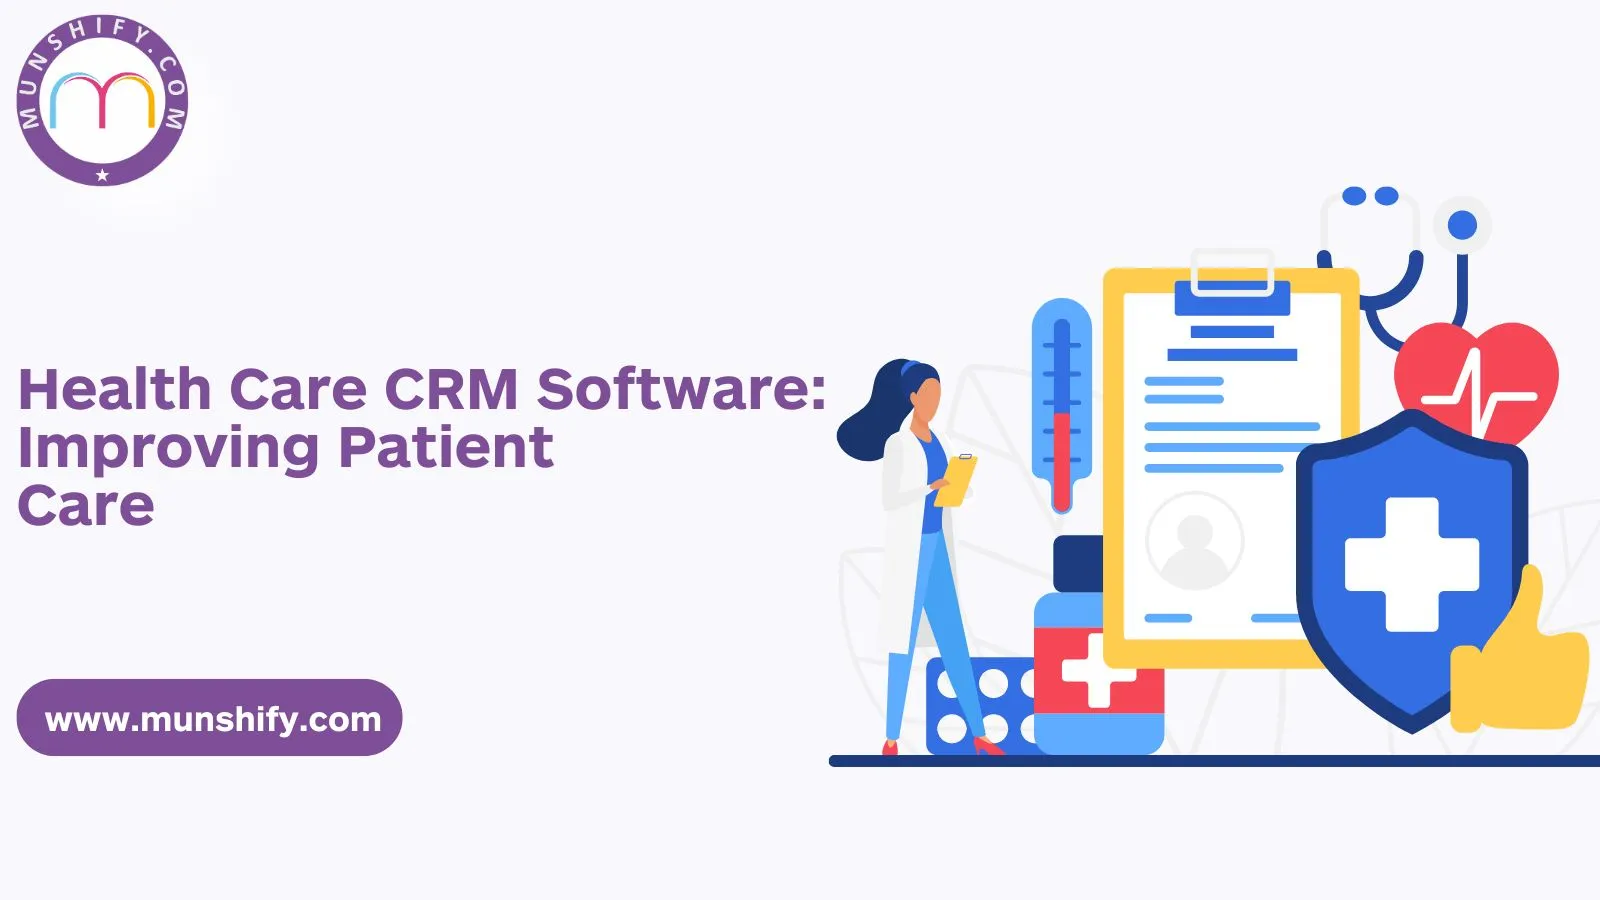 Health Care CRM Software: Improving Patient Care